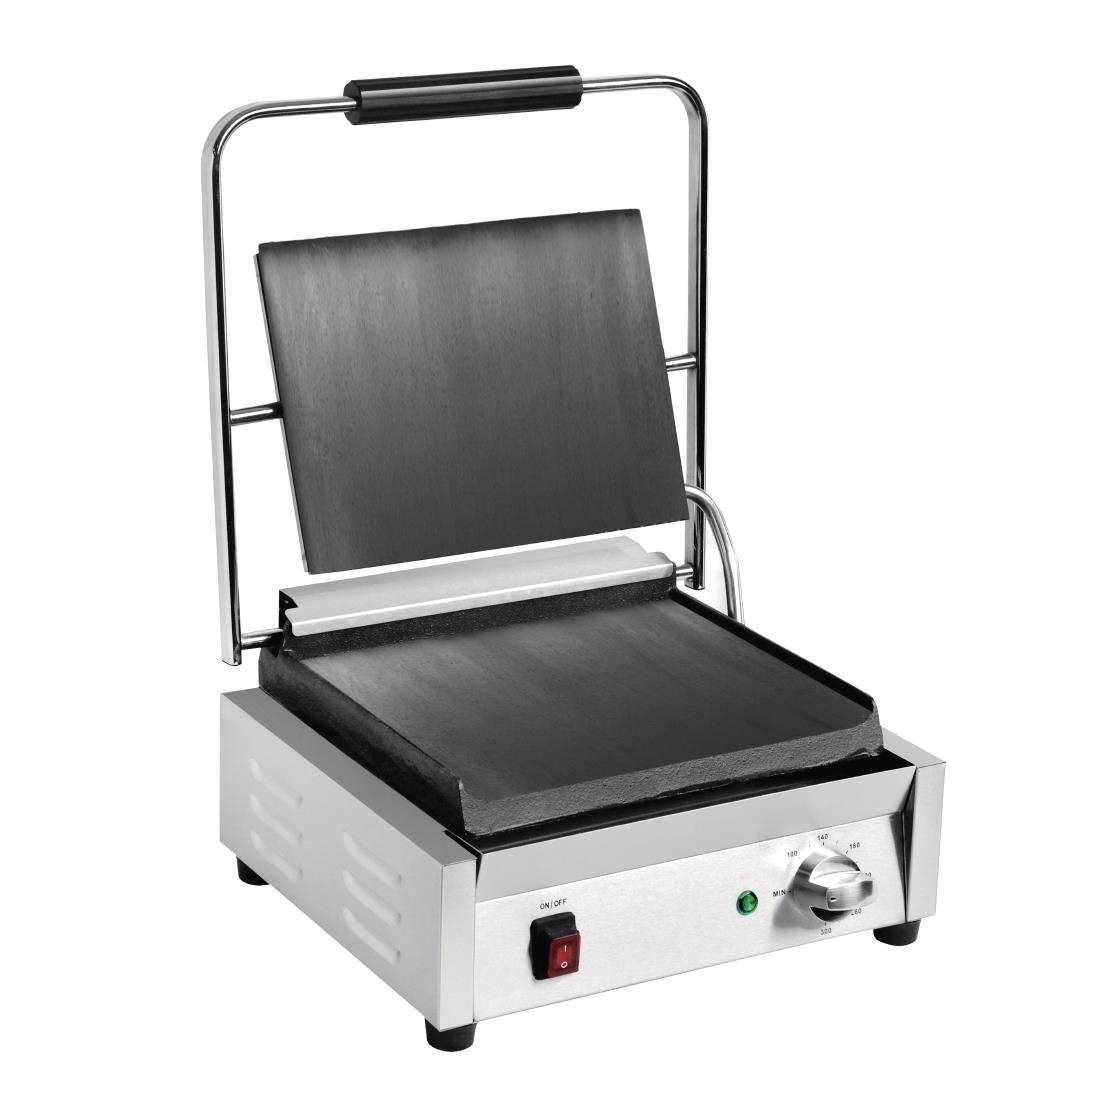 Buffalo Bistro Large Contact Grill - DY997  - 2